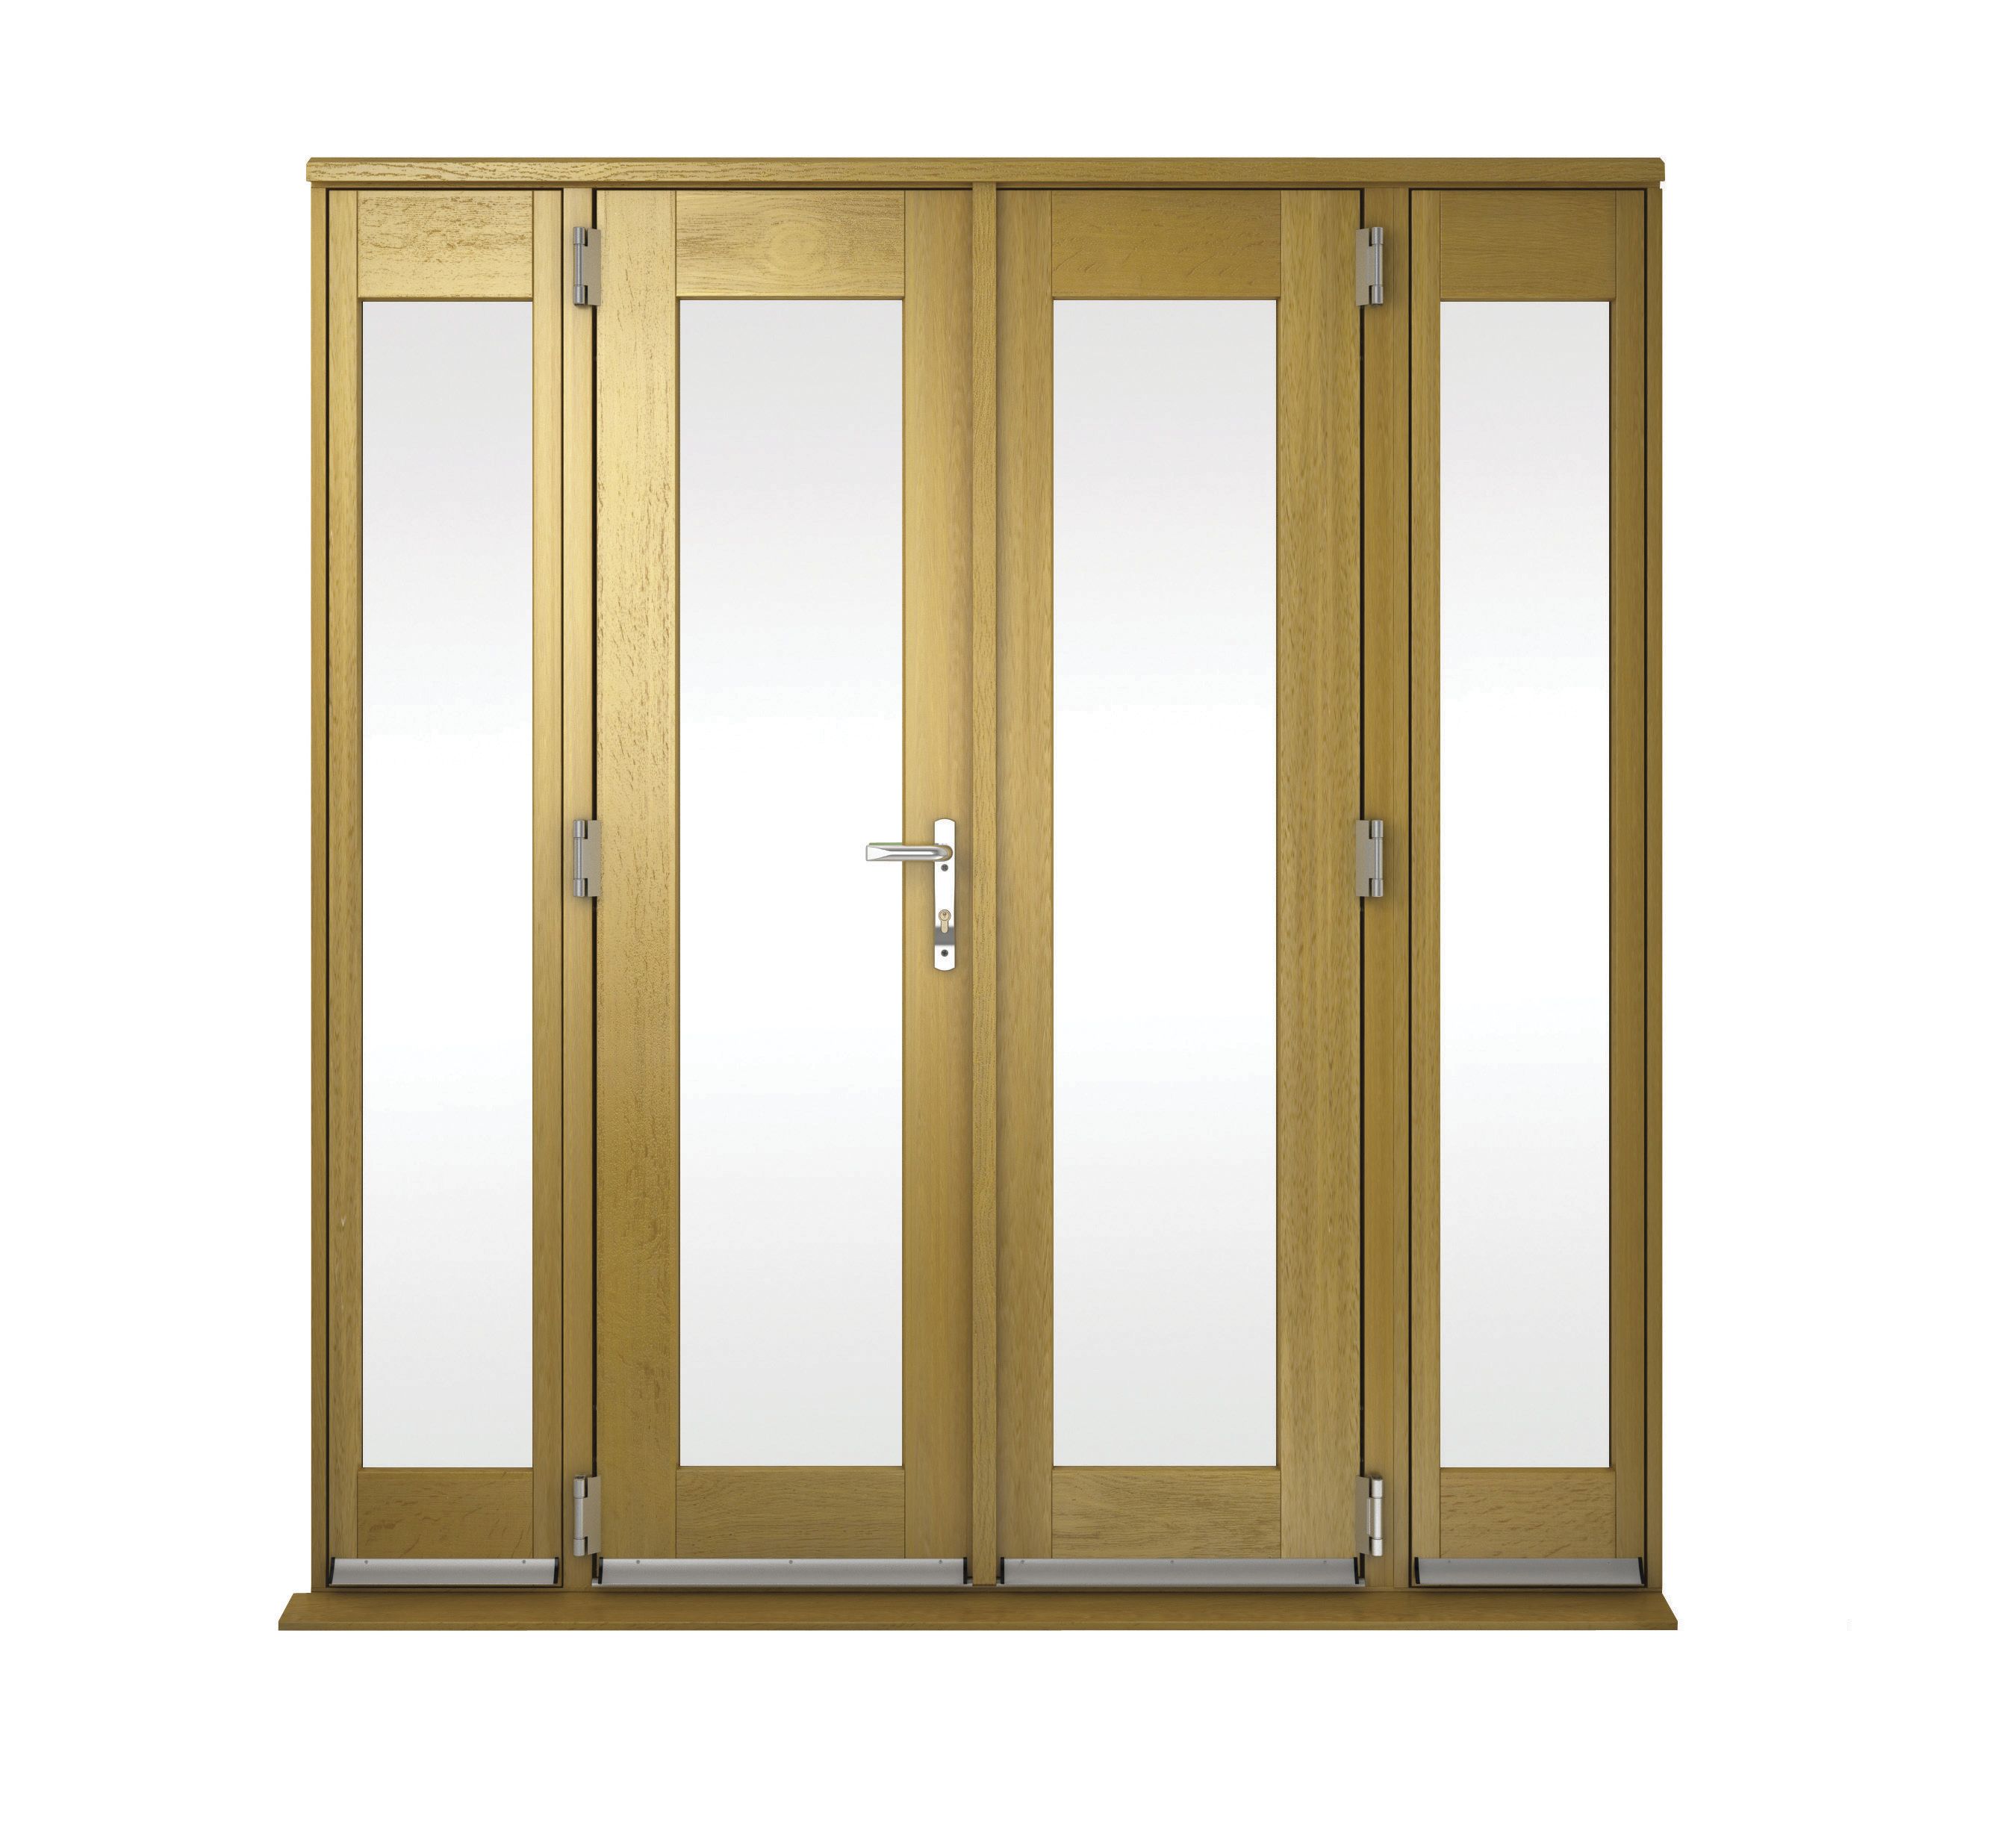 Image of Wickes Albery Pattern 10 Solid Oak Laminate French Doors 6ft with 2 Side Lites 300mm